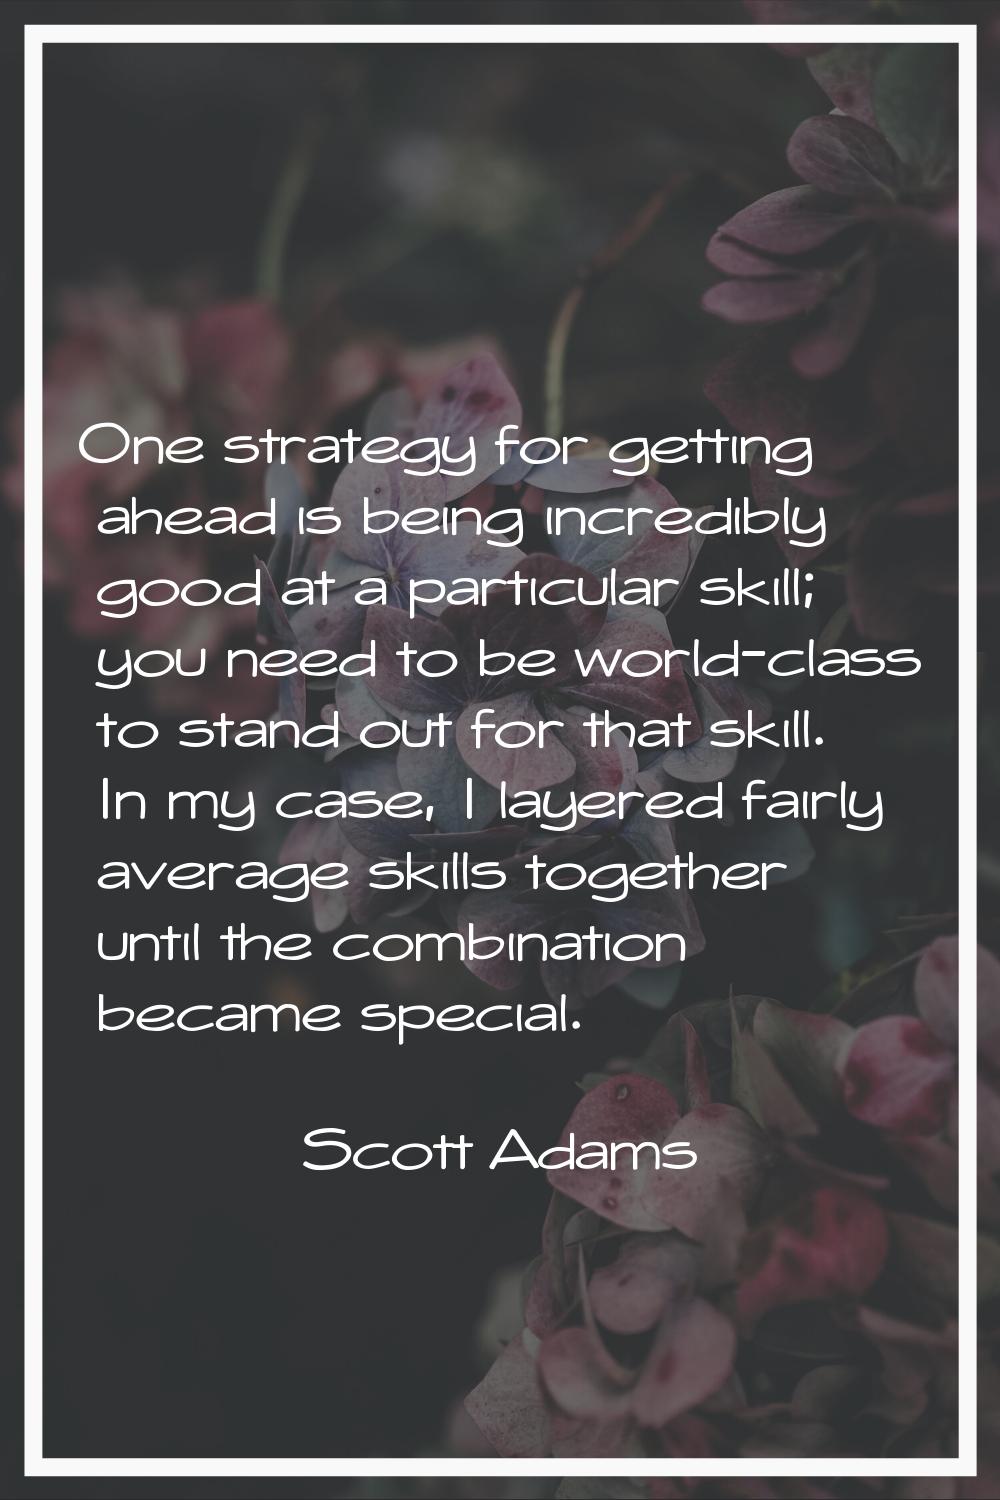 One strategy for getting ahead is being incredibly good at a particular skill; you need to be world